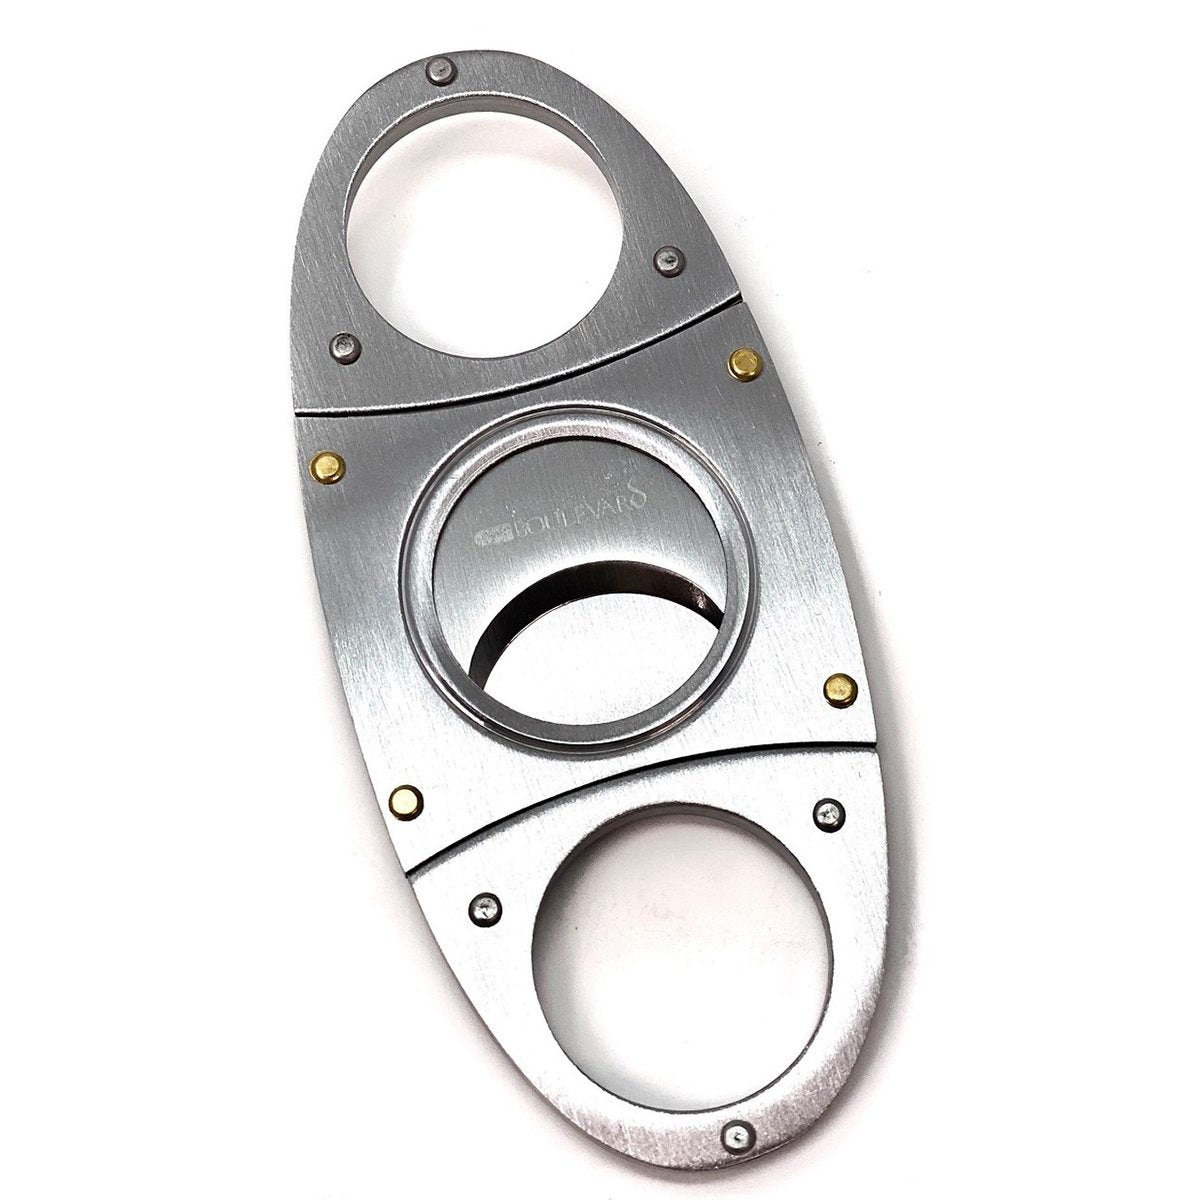 Cigar Cutter Metal ANTIQUE Style Double Stainless Steel Blades O Handles